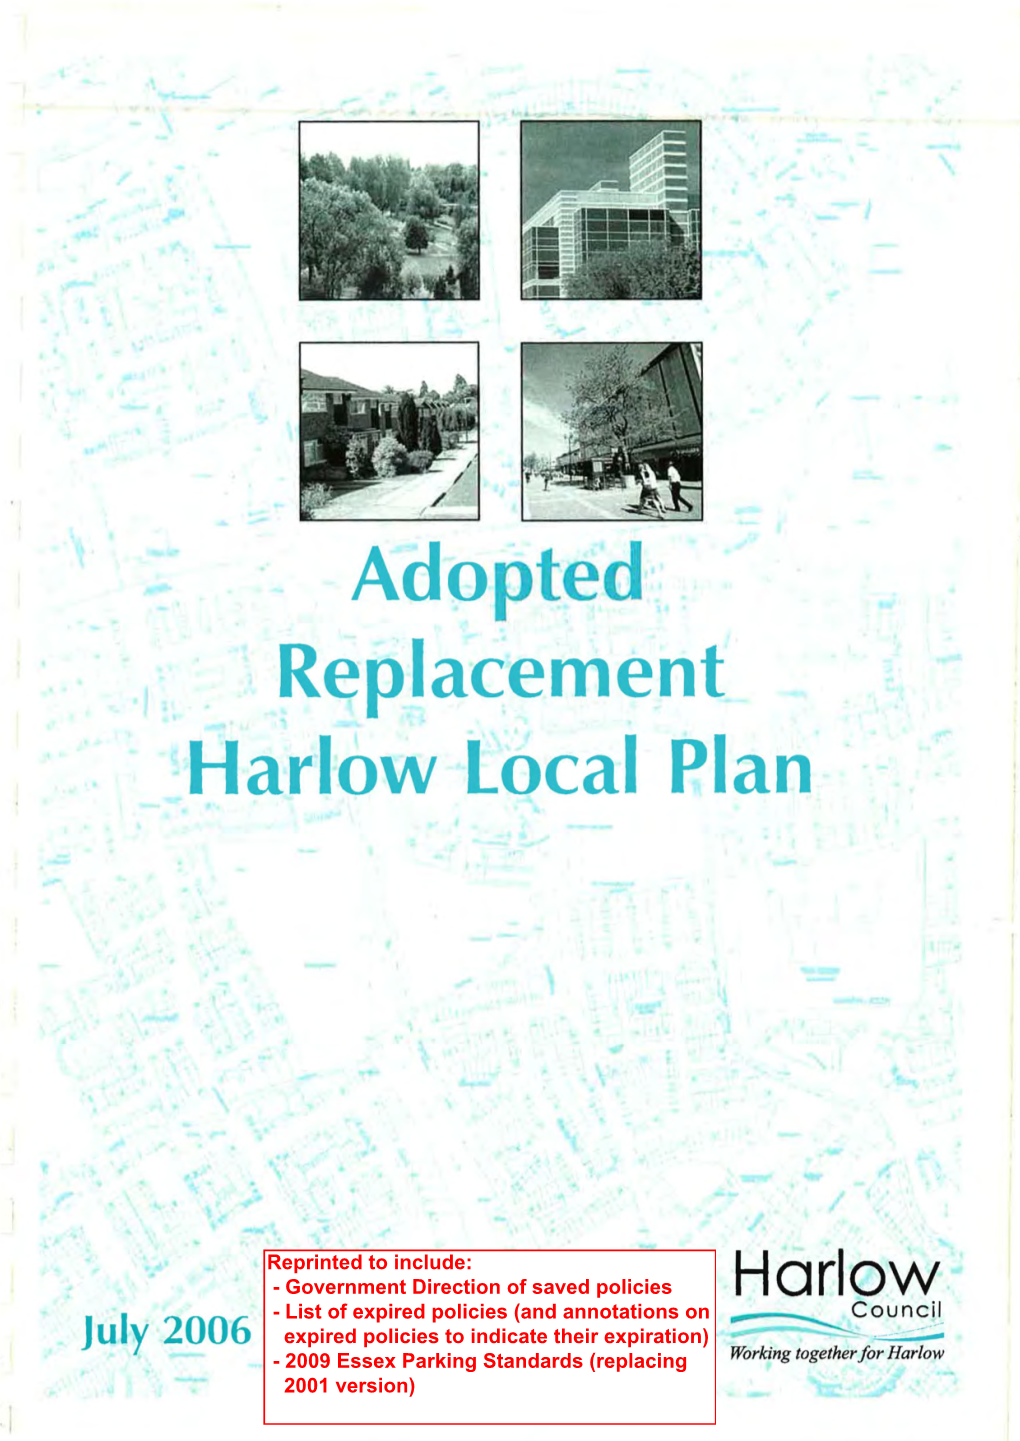 Adopted Replacement Harlow Local Plan